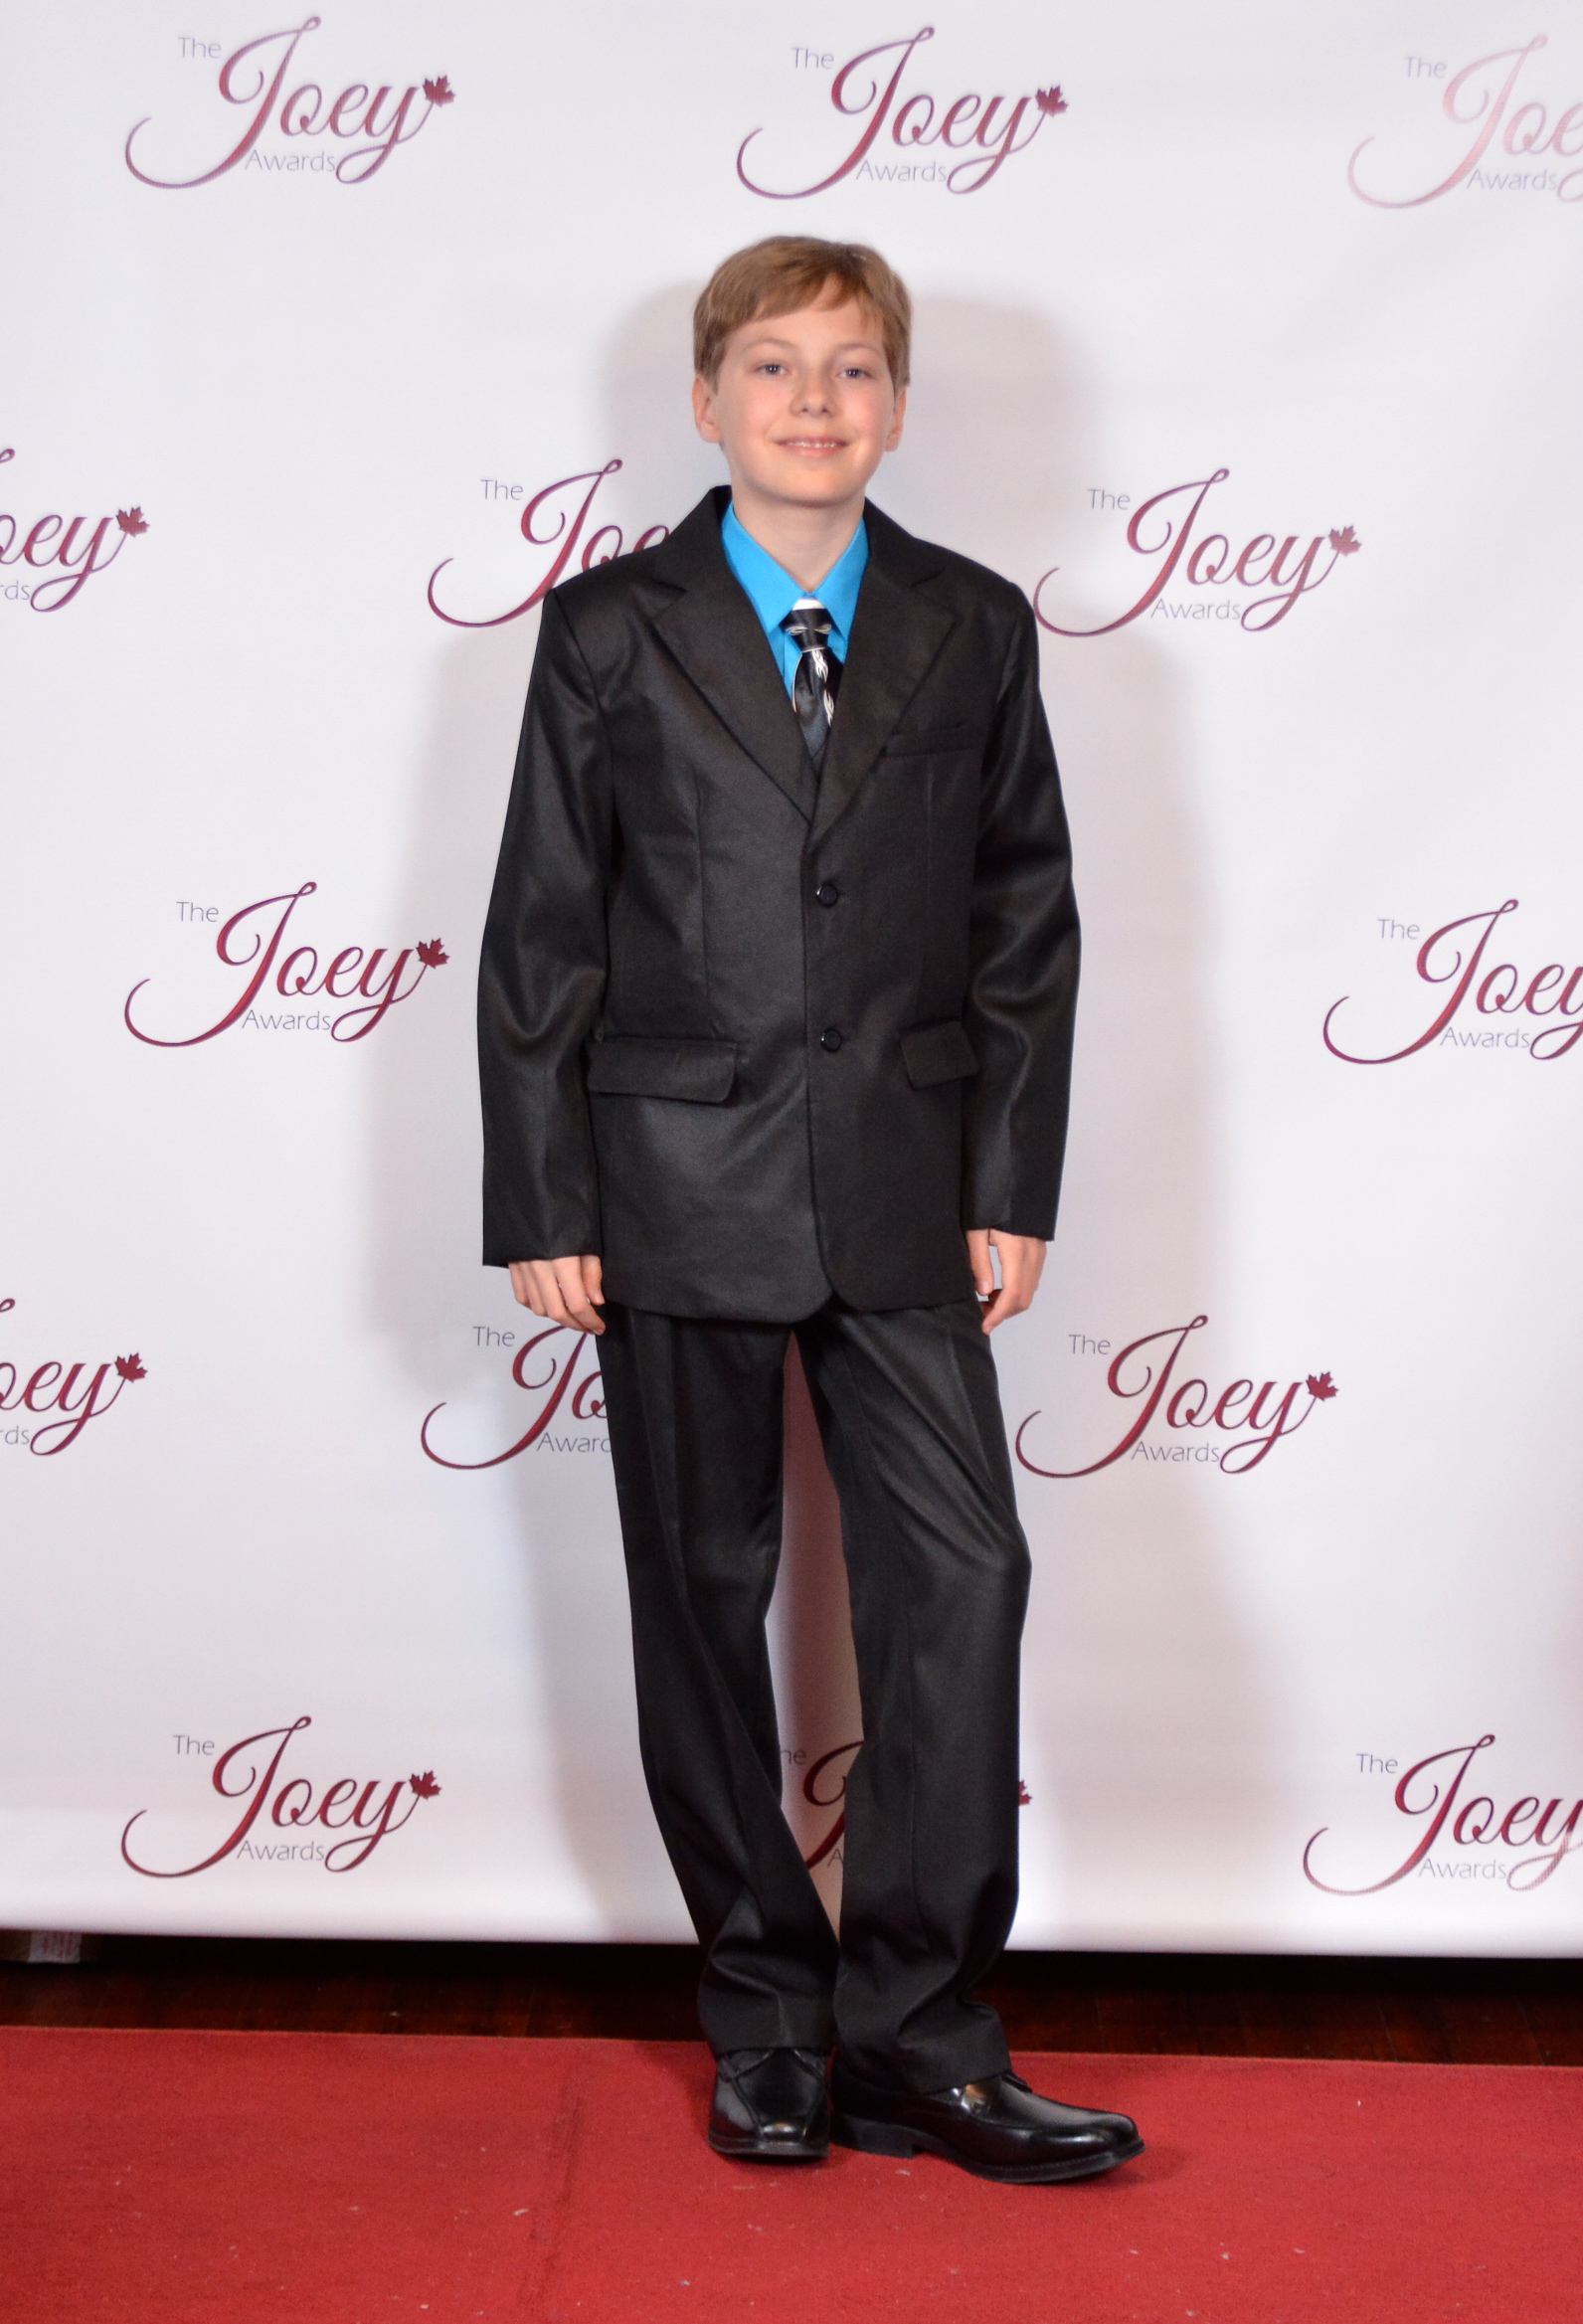 Alex on the red carpet at the 2014 Joey Awards in Vancouver